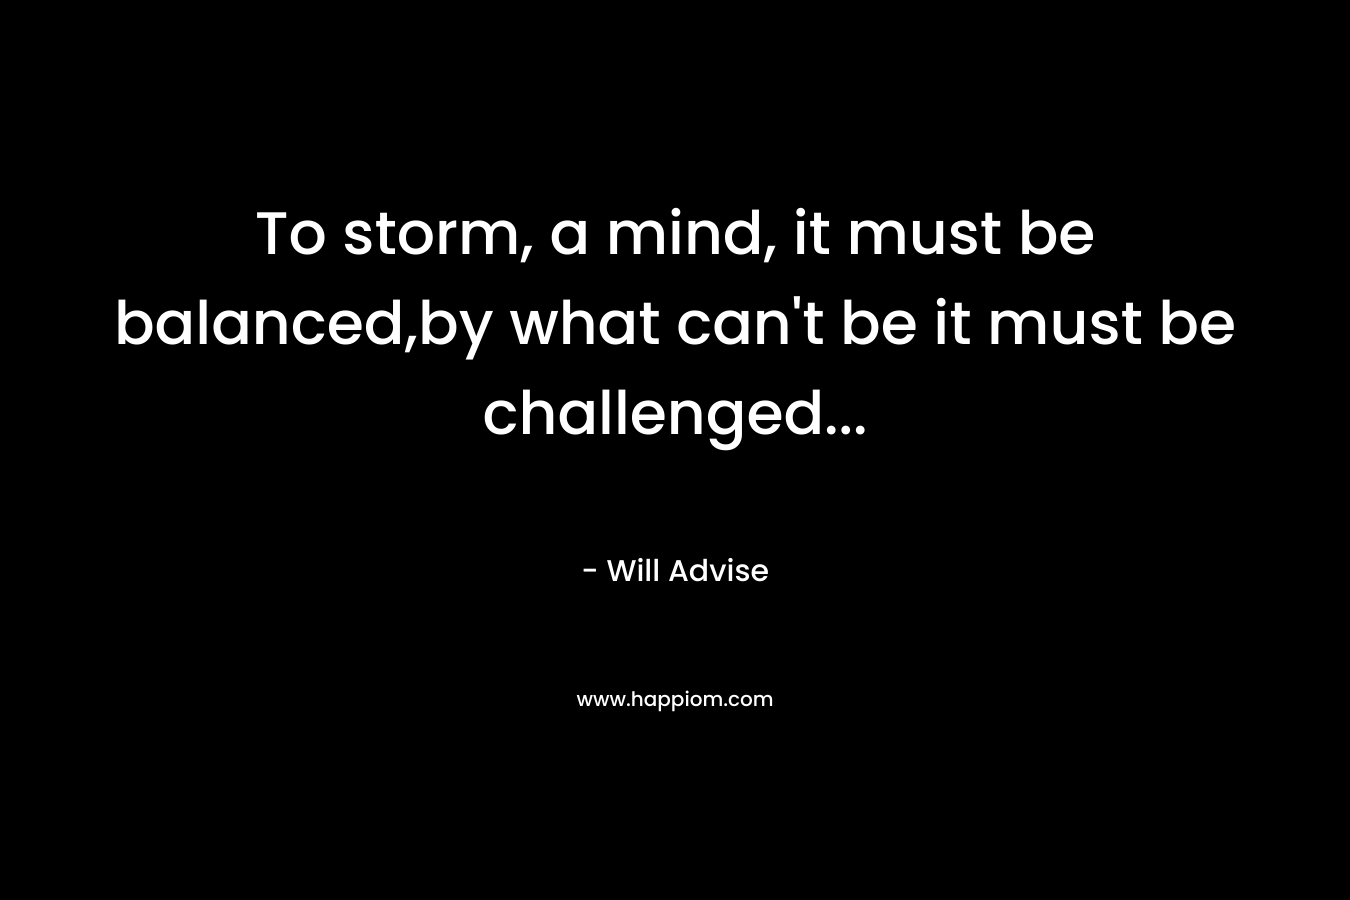 To storm, a mind, it must be balanced,by what can't be it must be challenged...